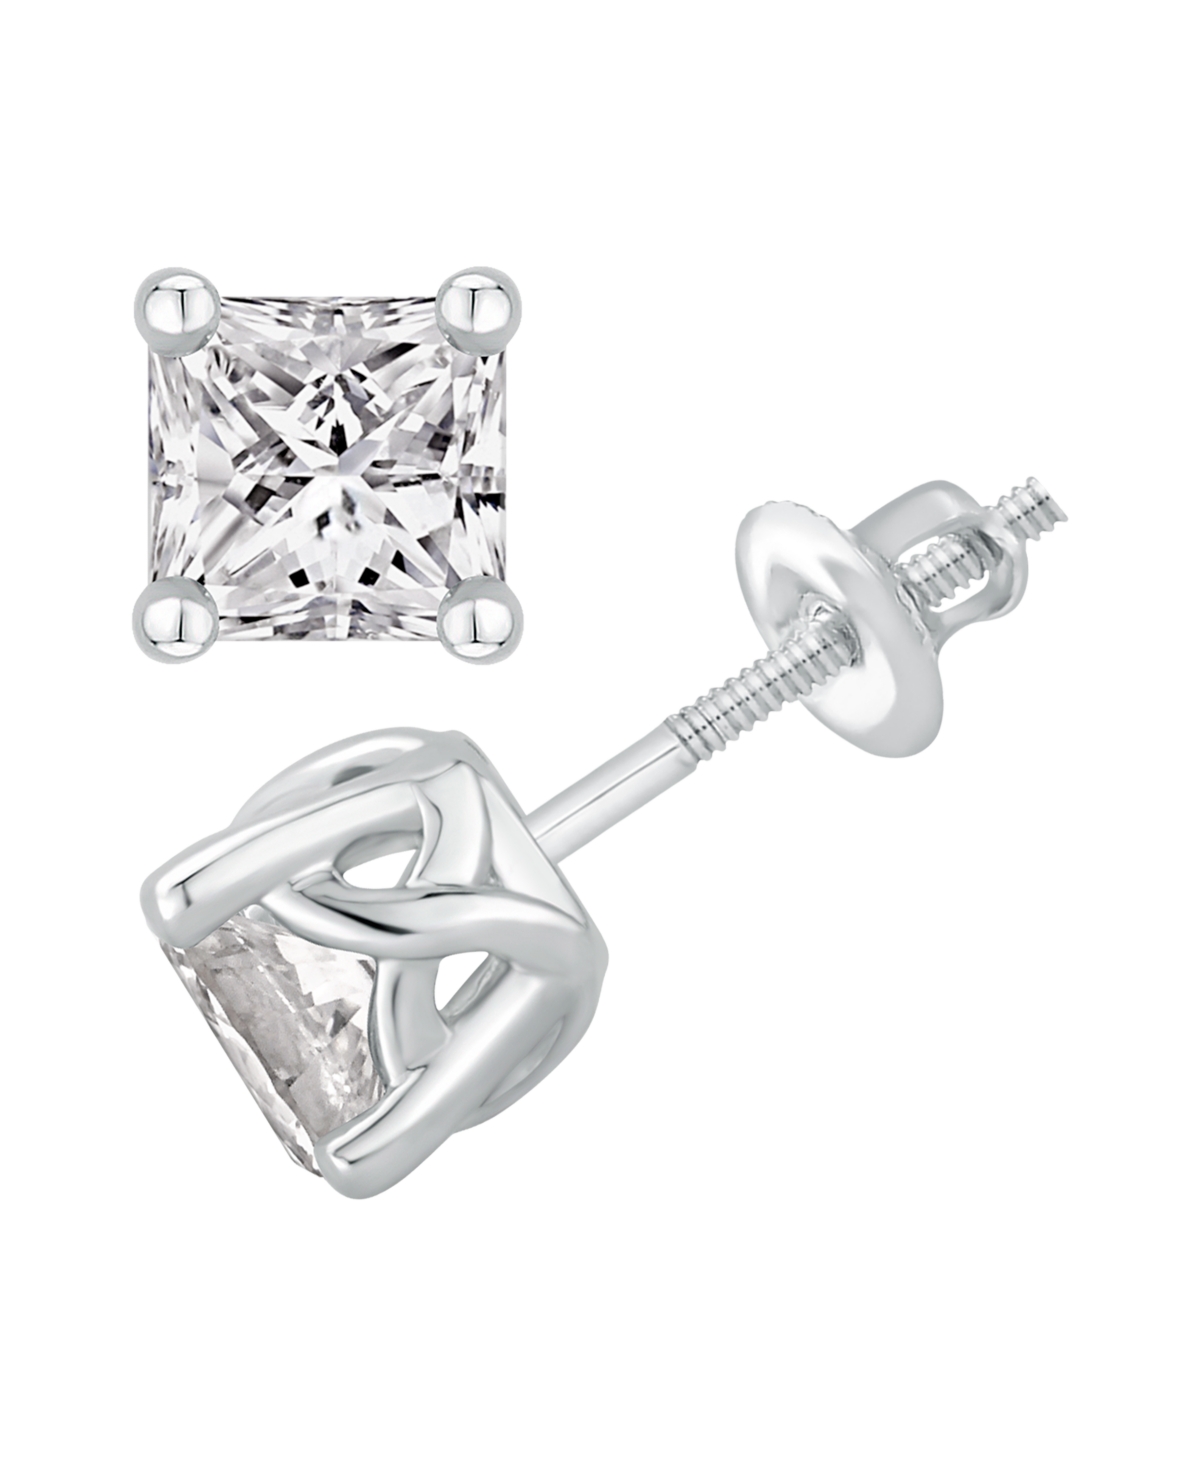 Gia Certified Diamond Princess Stud Earrings (1 ct. t.w.) in 14K White Gold - White Gold